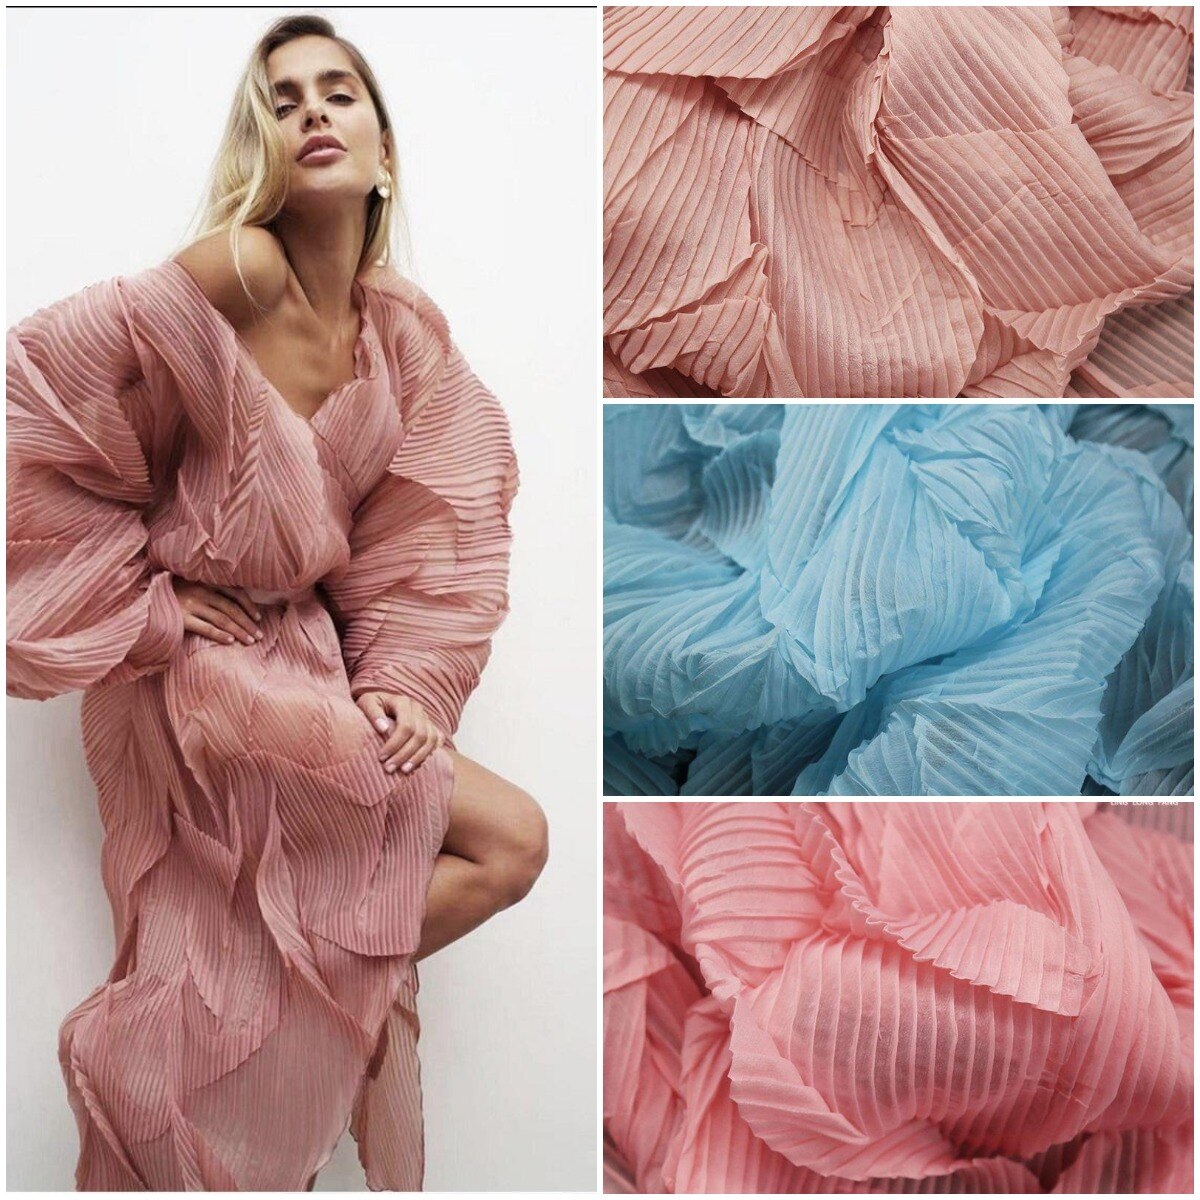 Pleated Dress Fabric By The Meter,Big Brand Designer Organza Fabric for Sewing Women Dress Clothes Pants,DIY Quilting Material